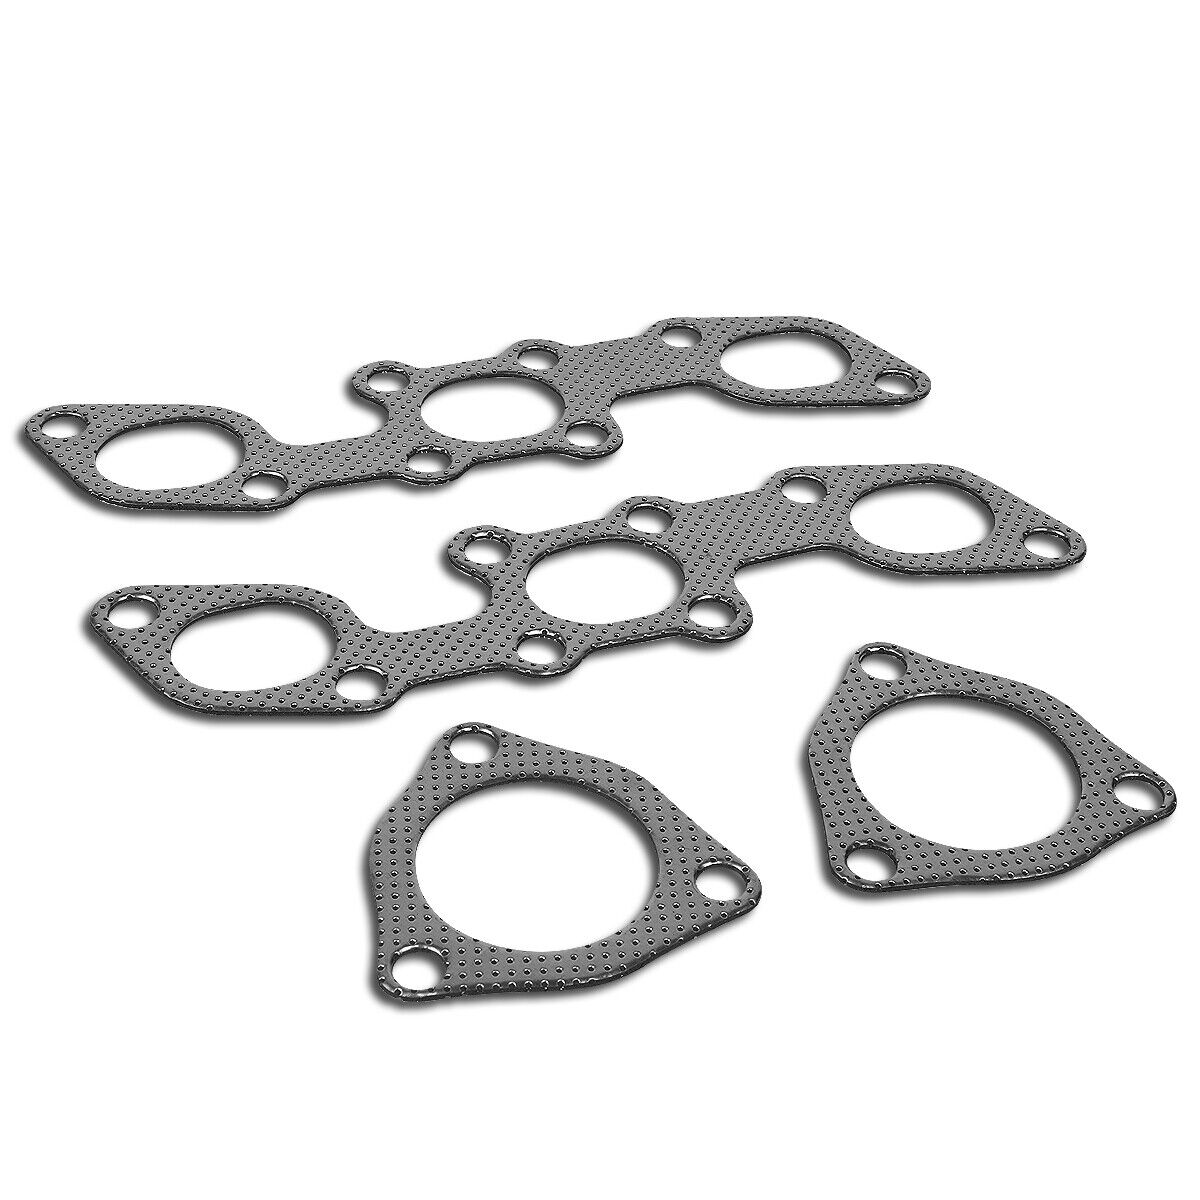 ALUMINUM EXHAUST MANIFOLD HEADER GASKET FOR 1990-1996 NISSAN 300ZX 3.0 NON TURBO